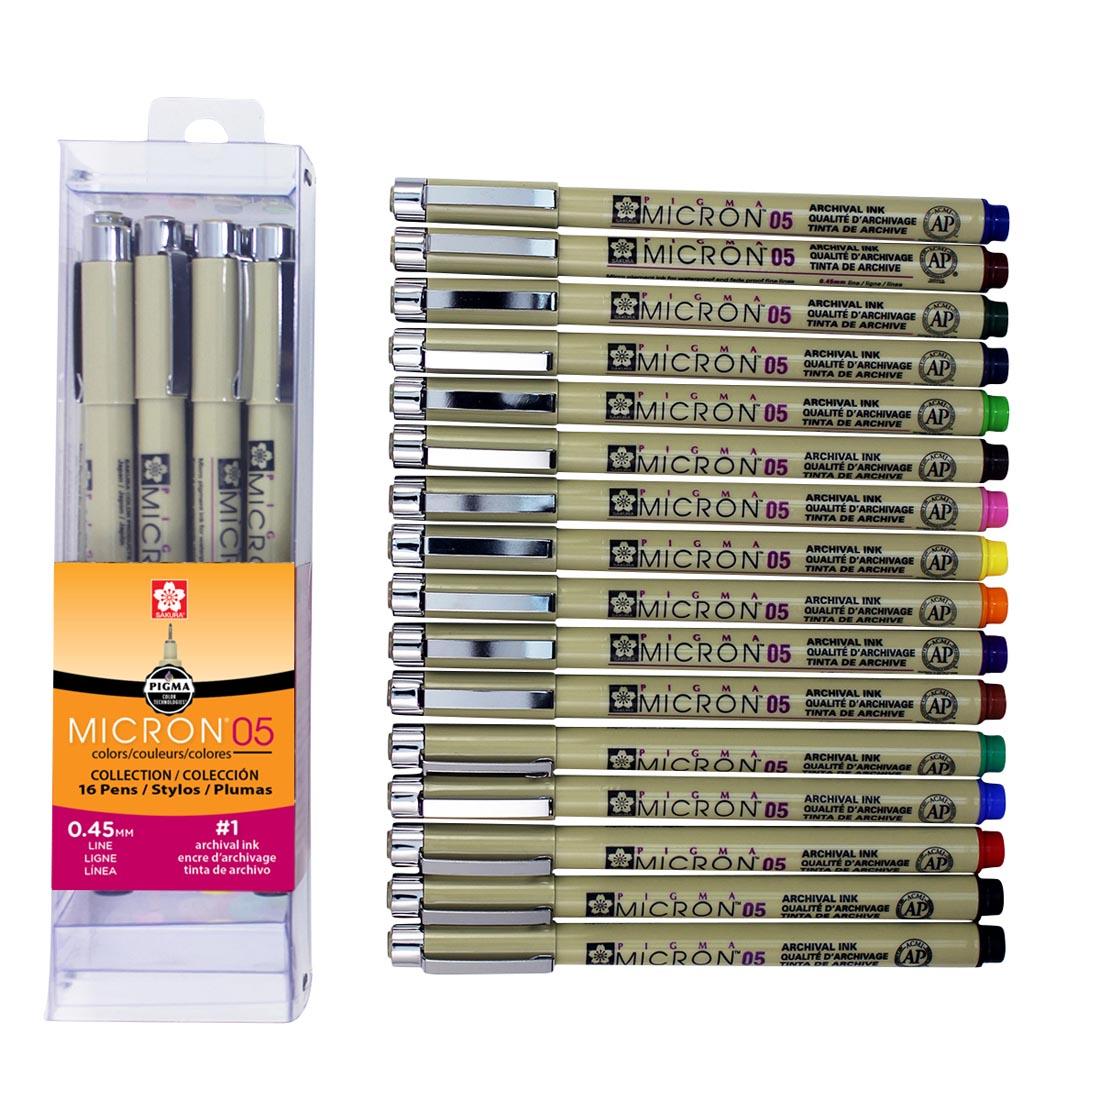 Sakura Pigma Micron Pens 16-Color Set shown in the box and with pens lined up next to it